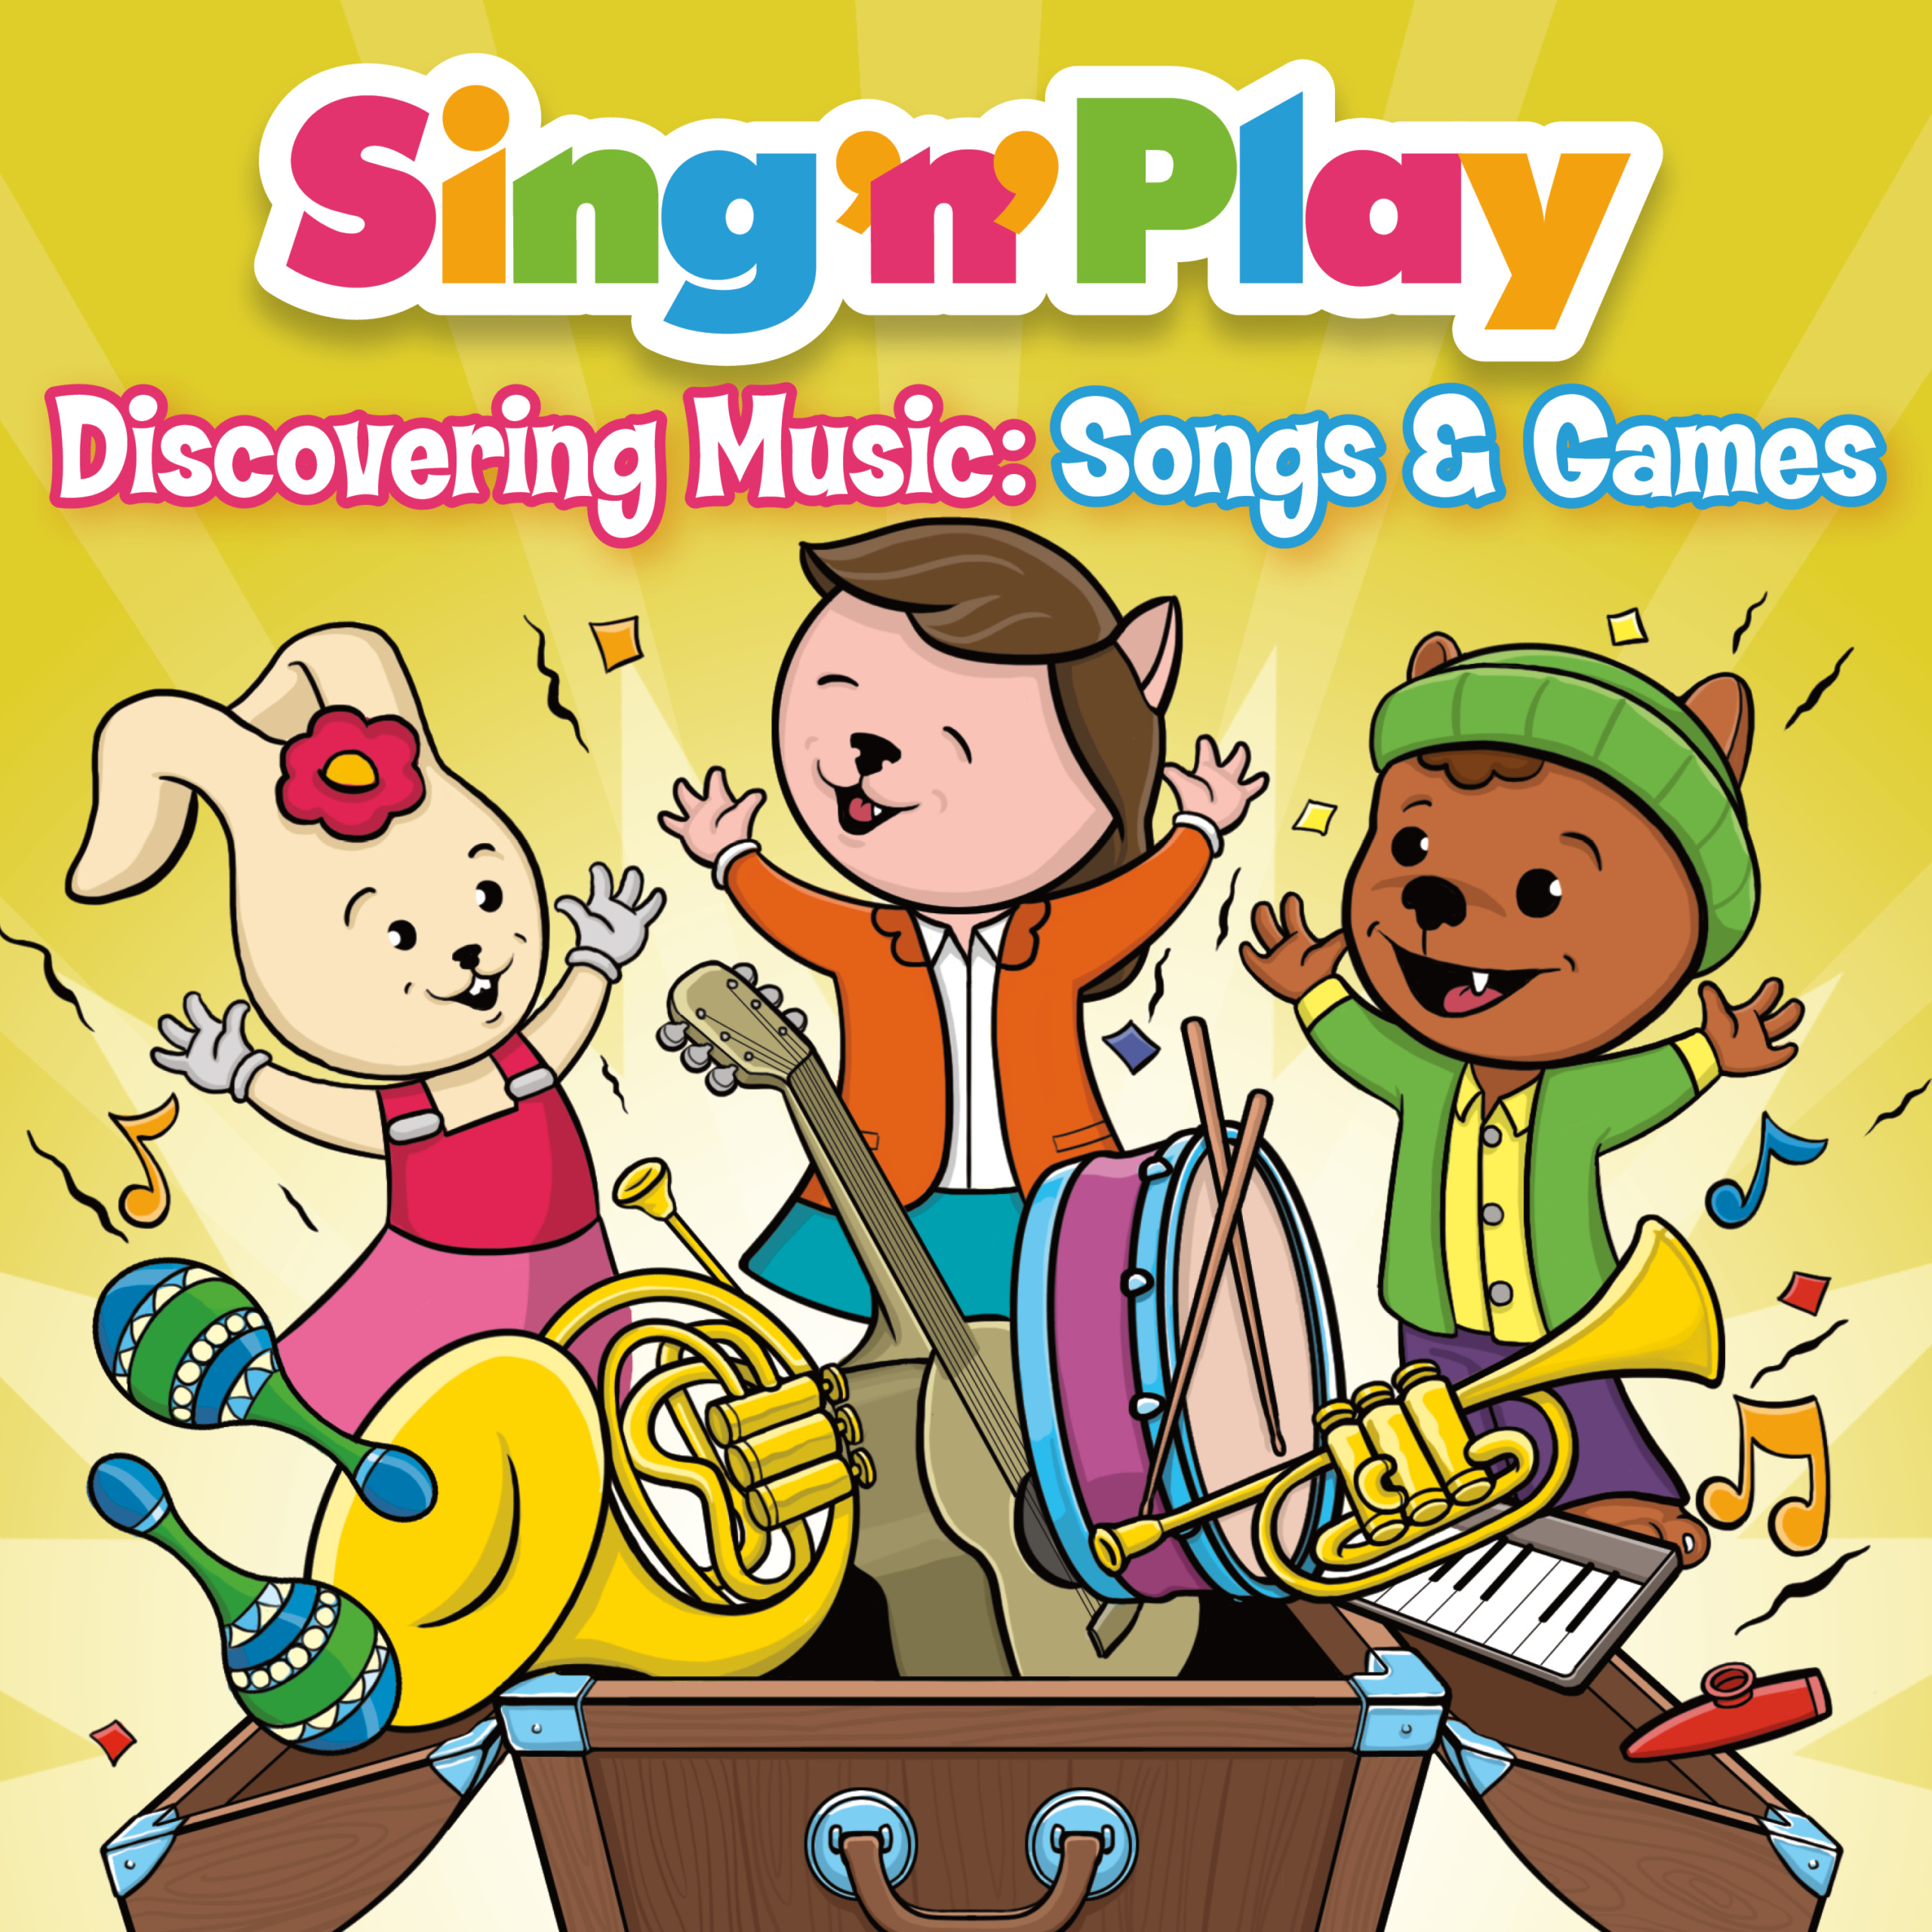 Discovering Music Songs & Games